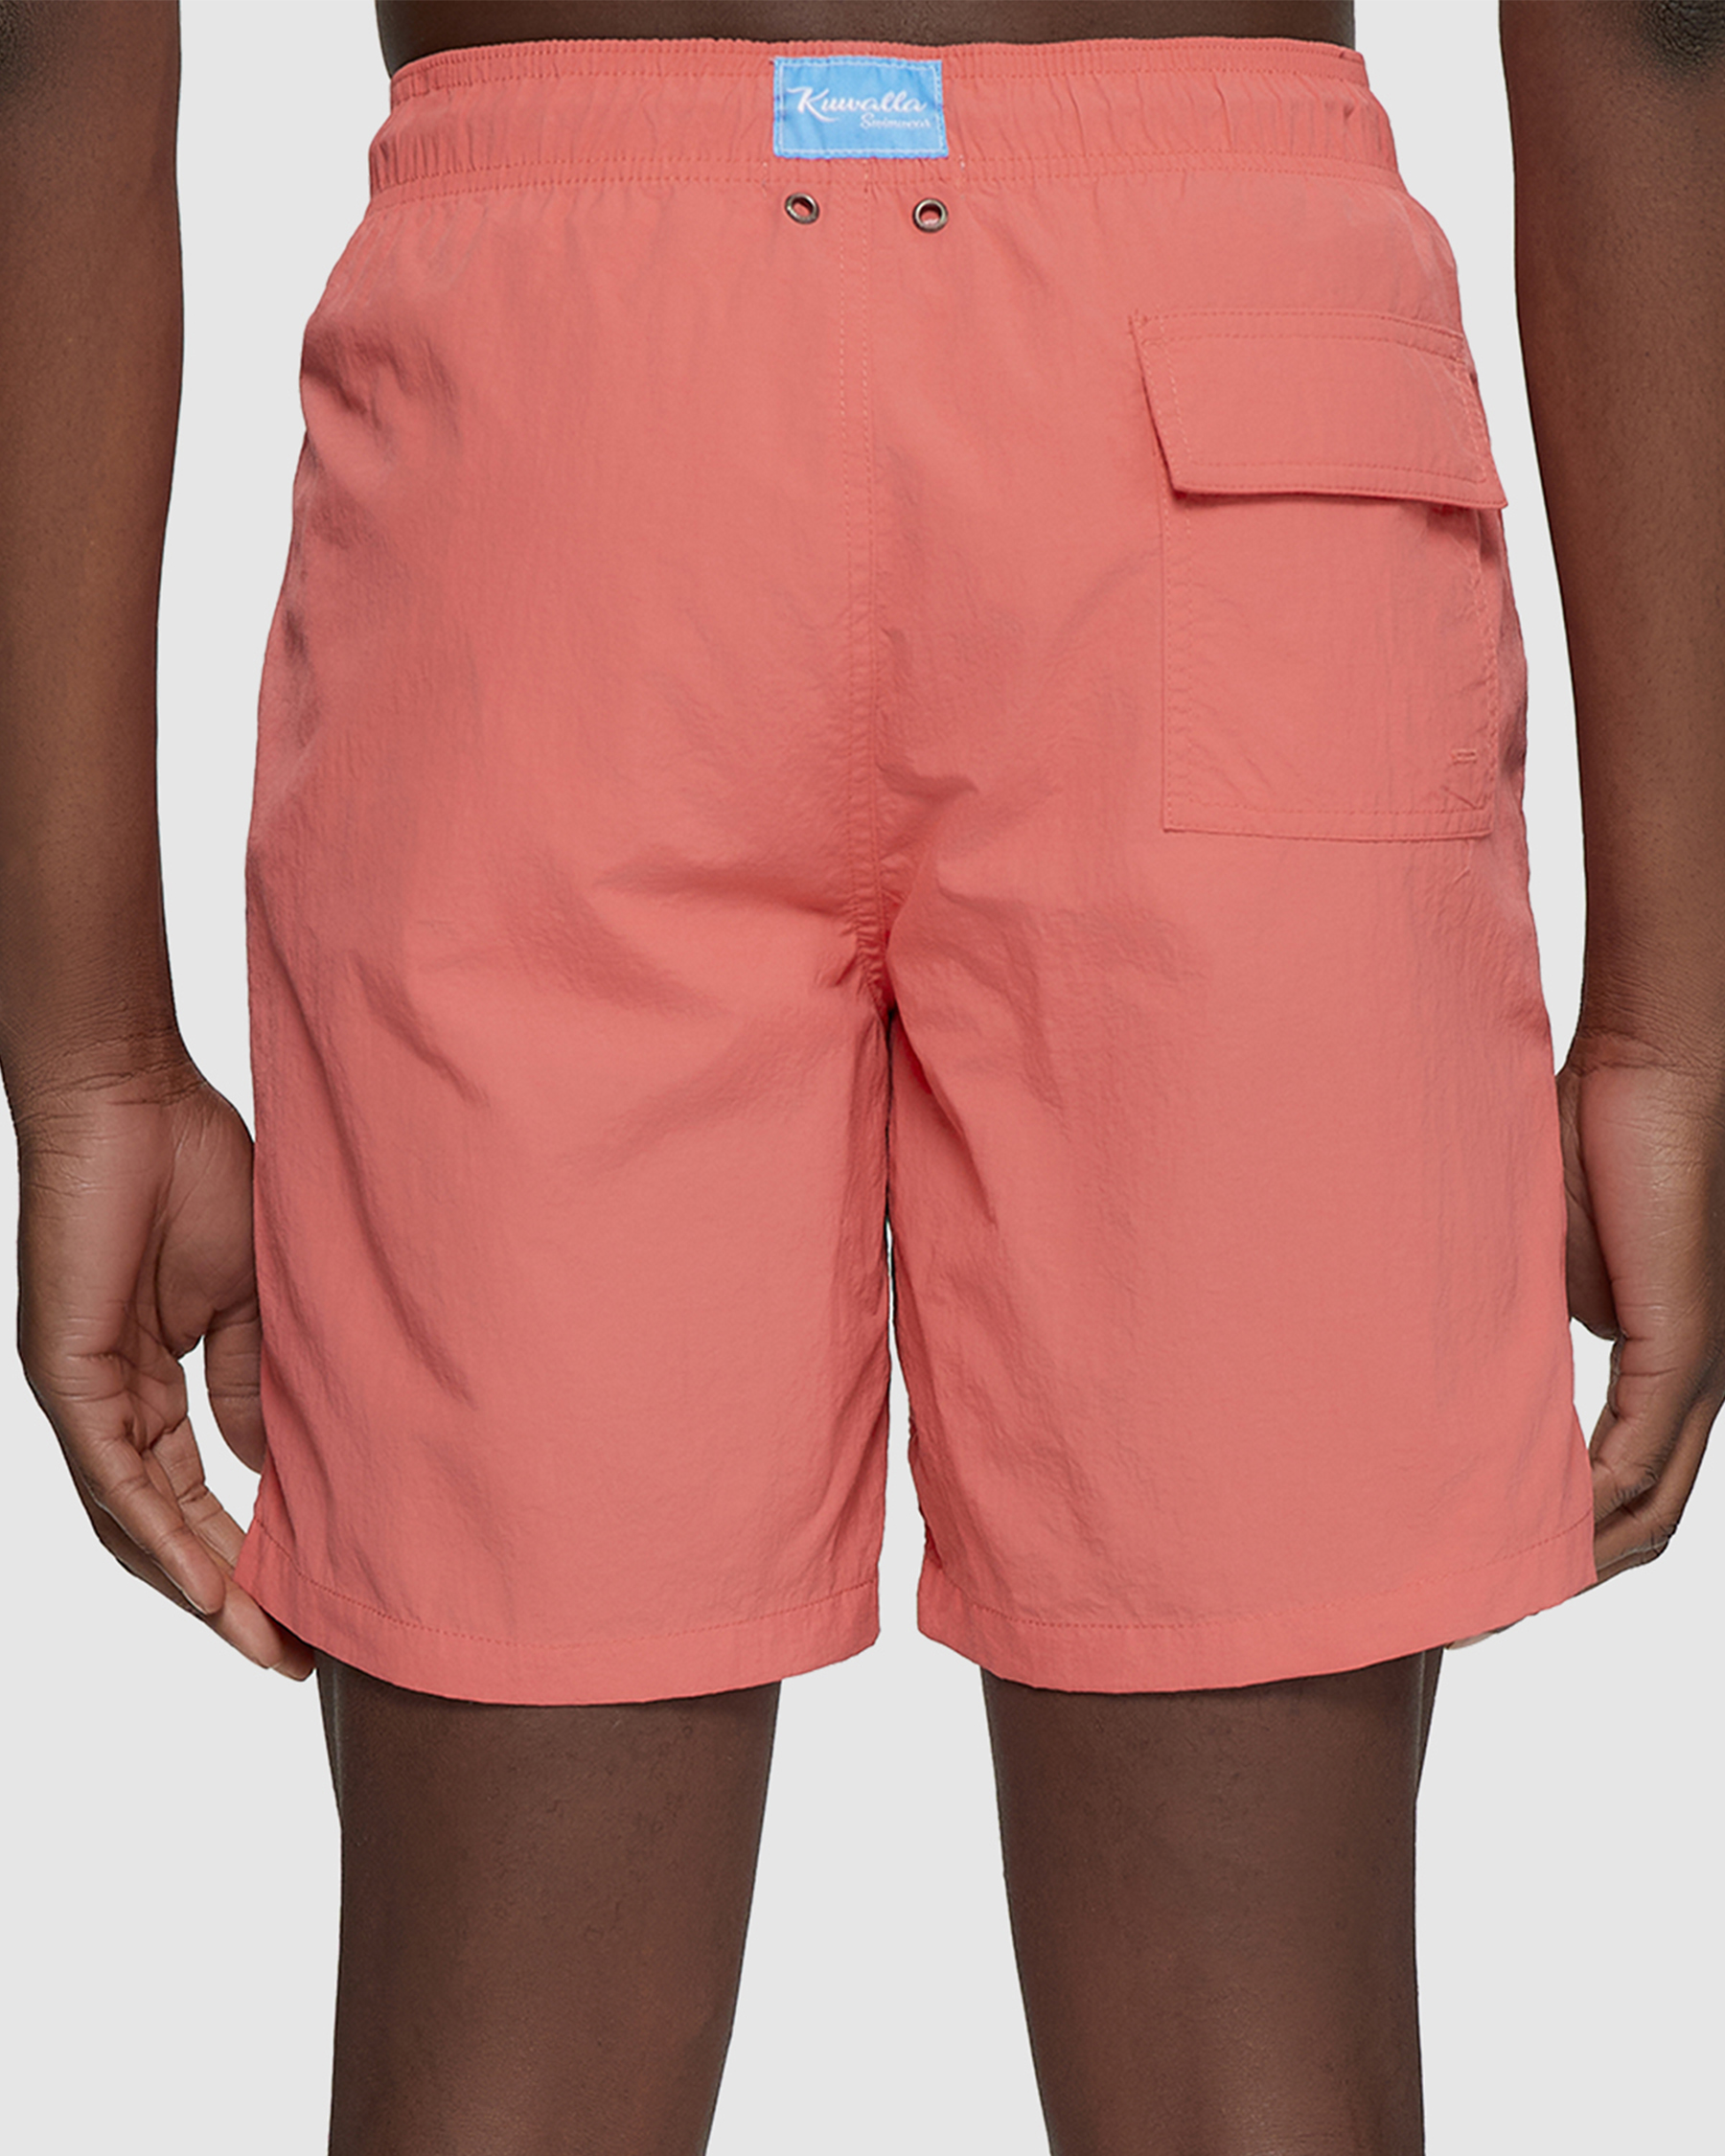 KUWALLA Essential Volley Swimsuit Coral KUL-SWIM01 - View2